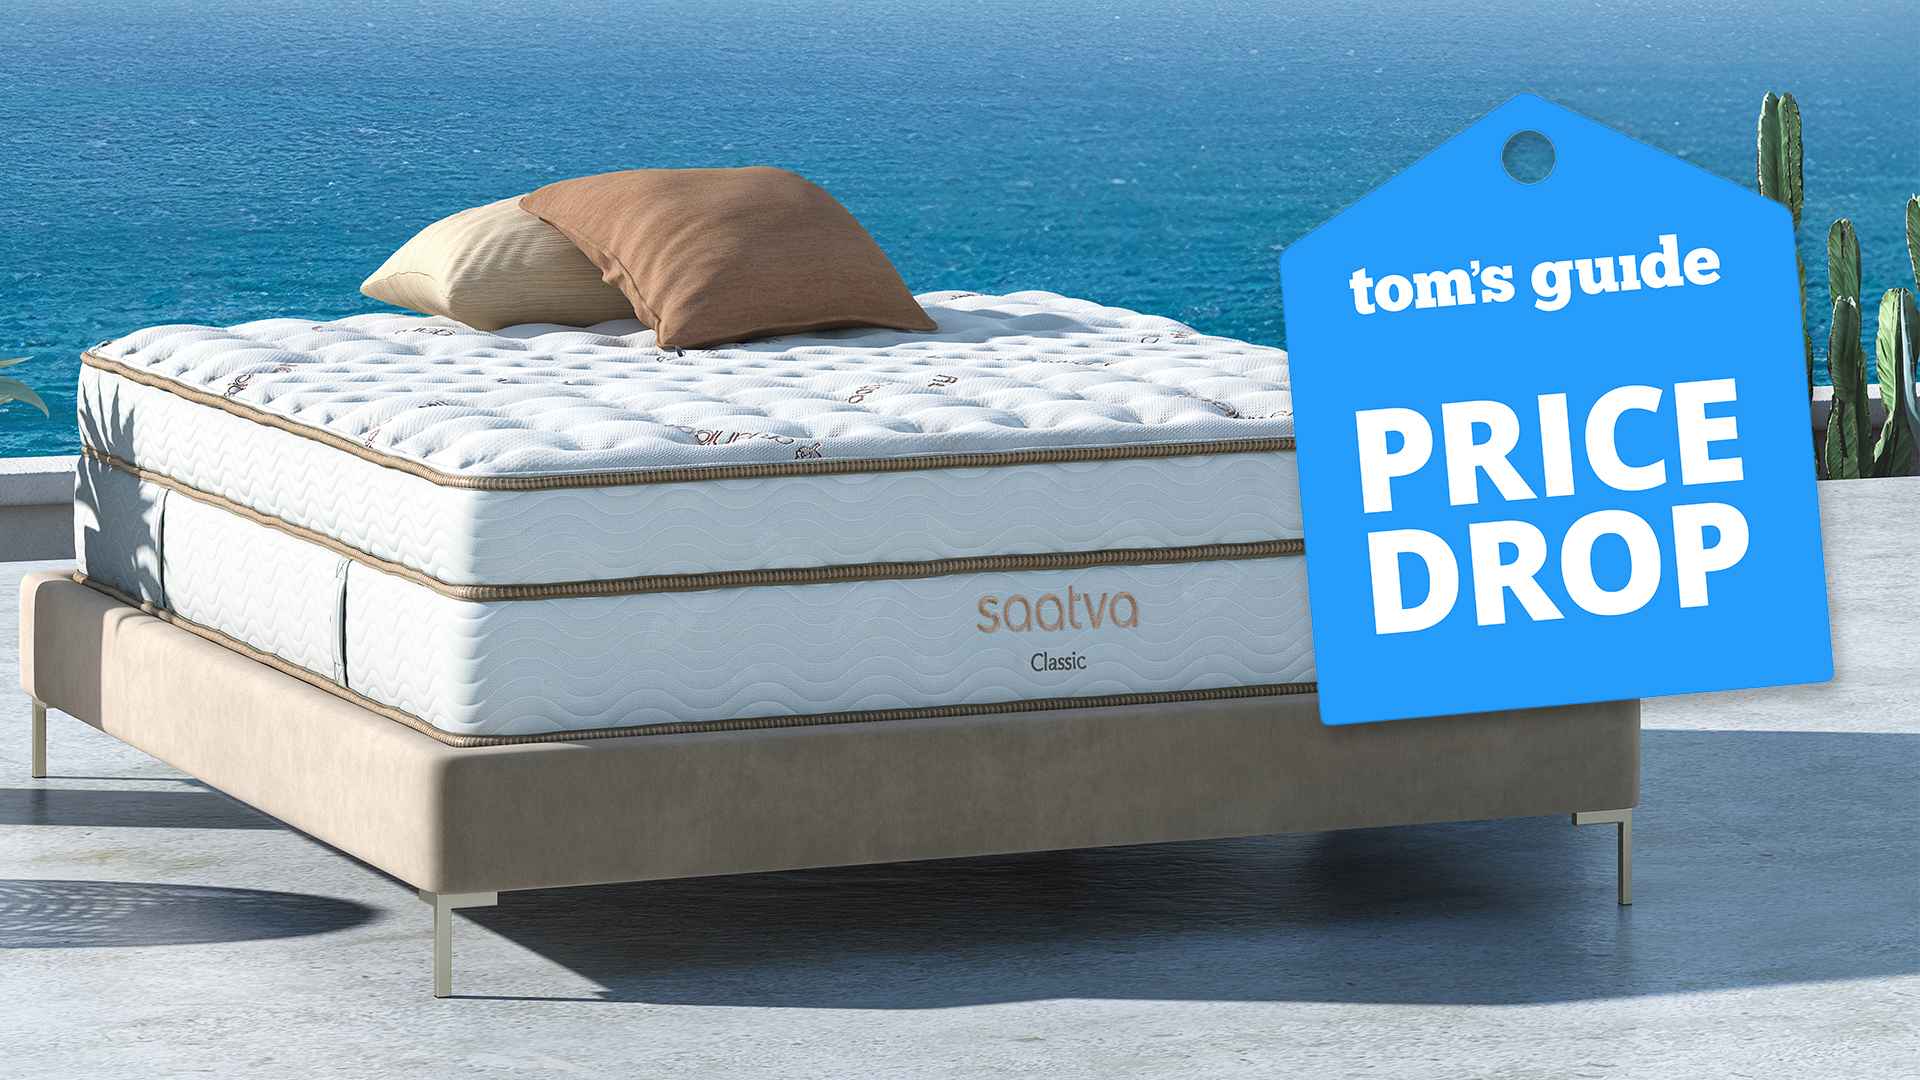 I test the world’s best hybrid mattresses — my top pick is $400 in Memorial Day sales